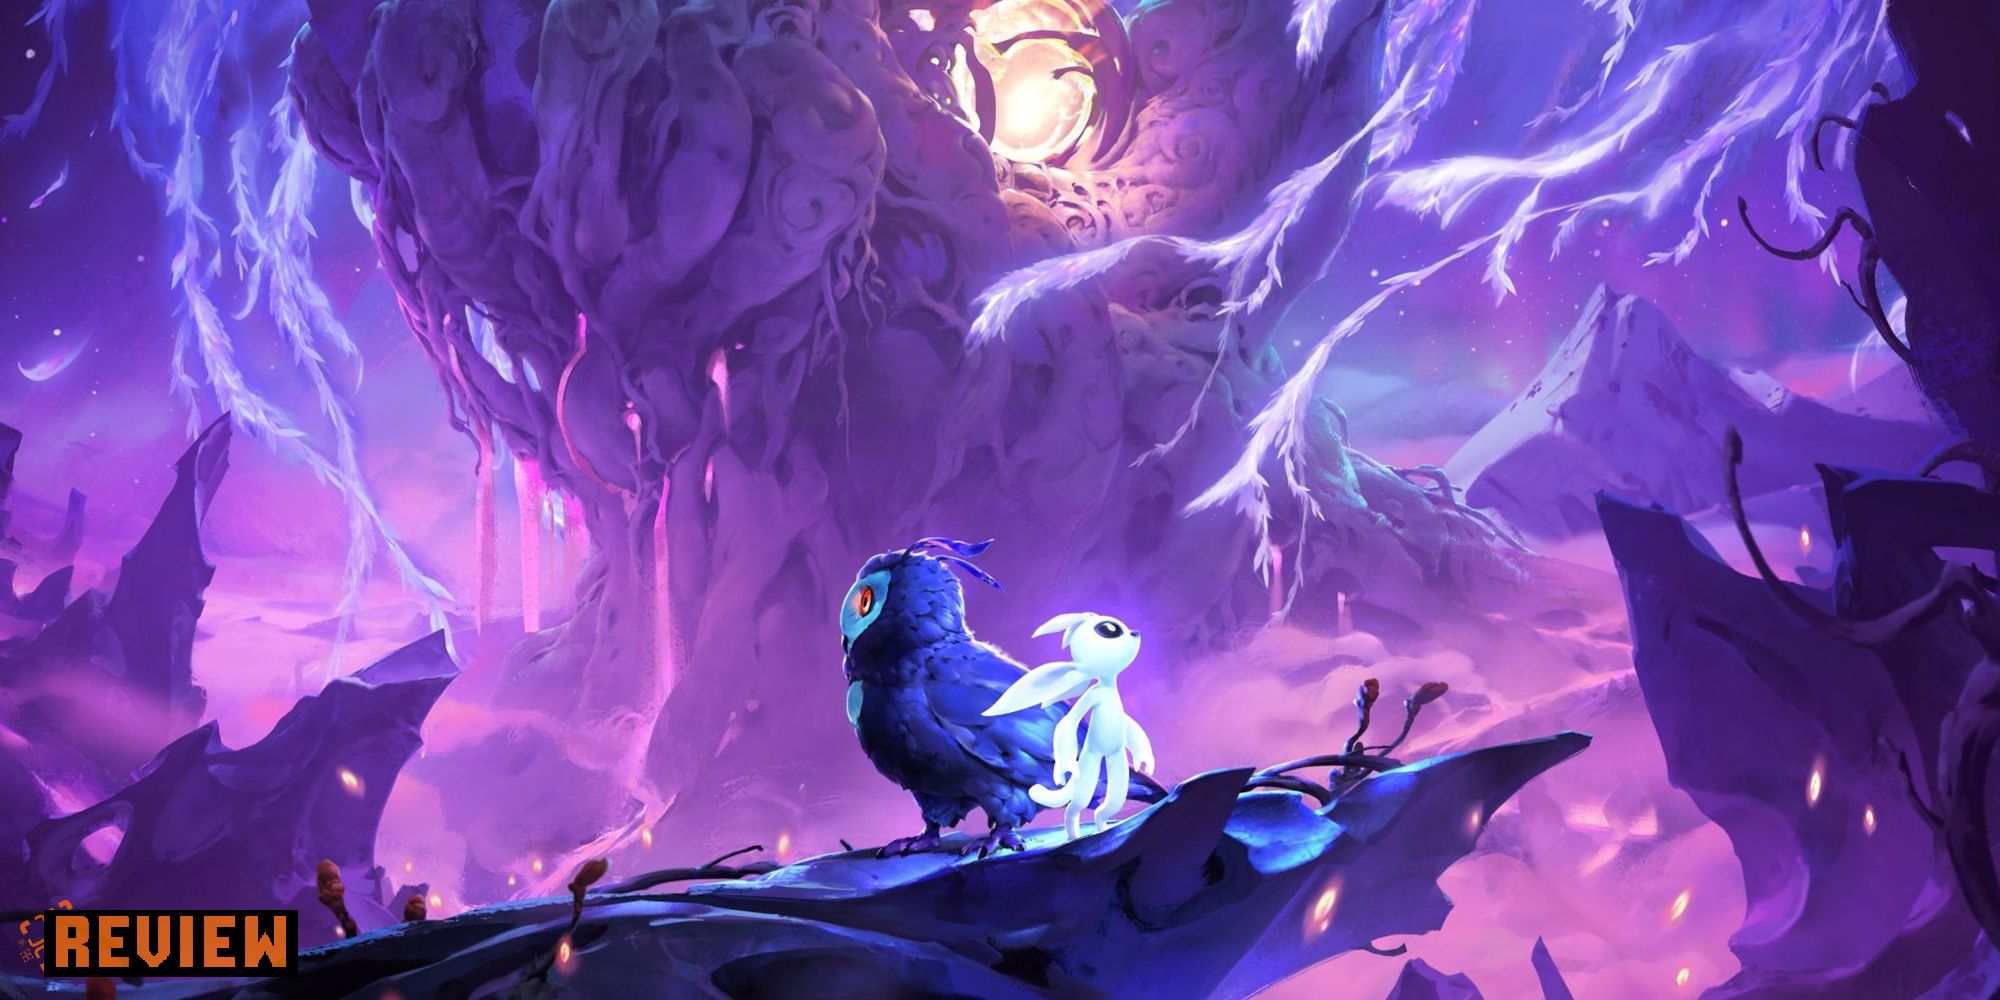 Game art from Ori And The Will Of The Wisps.